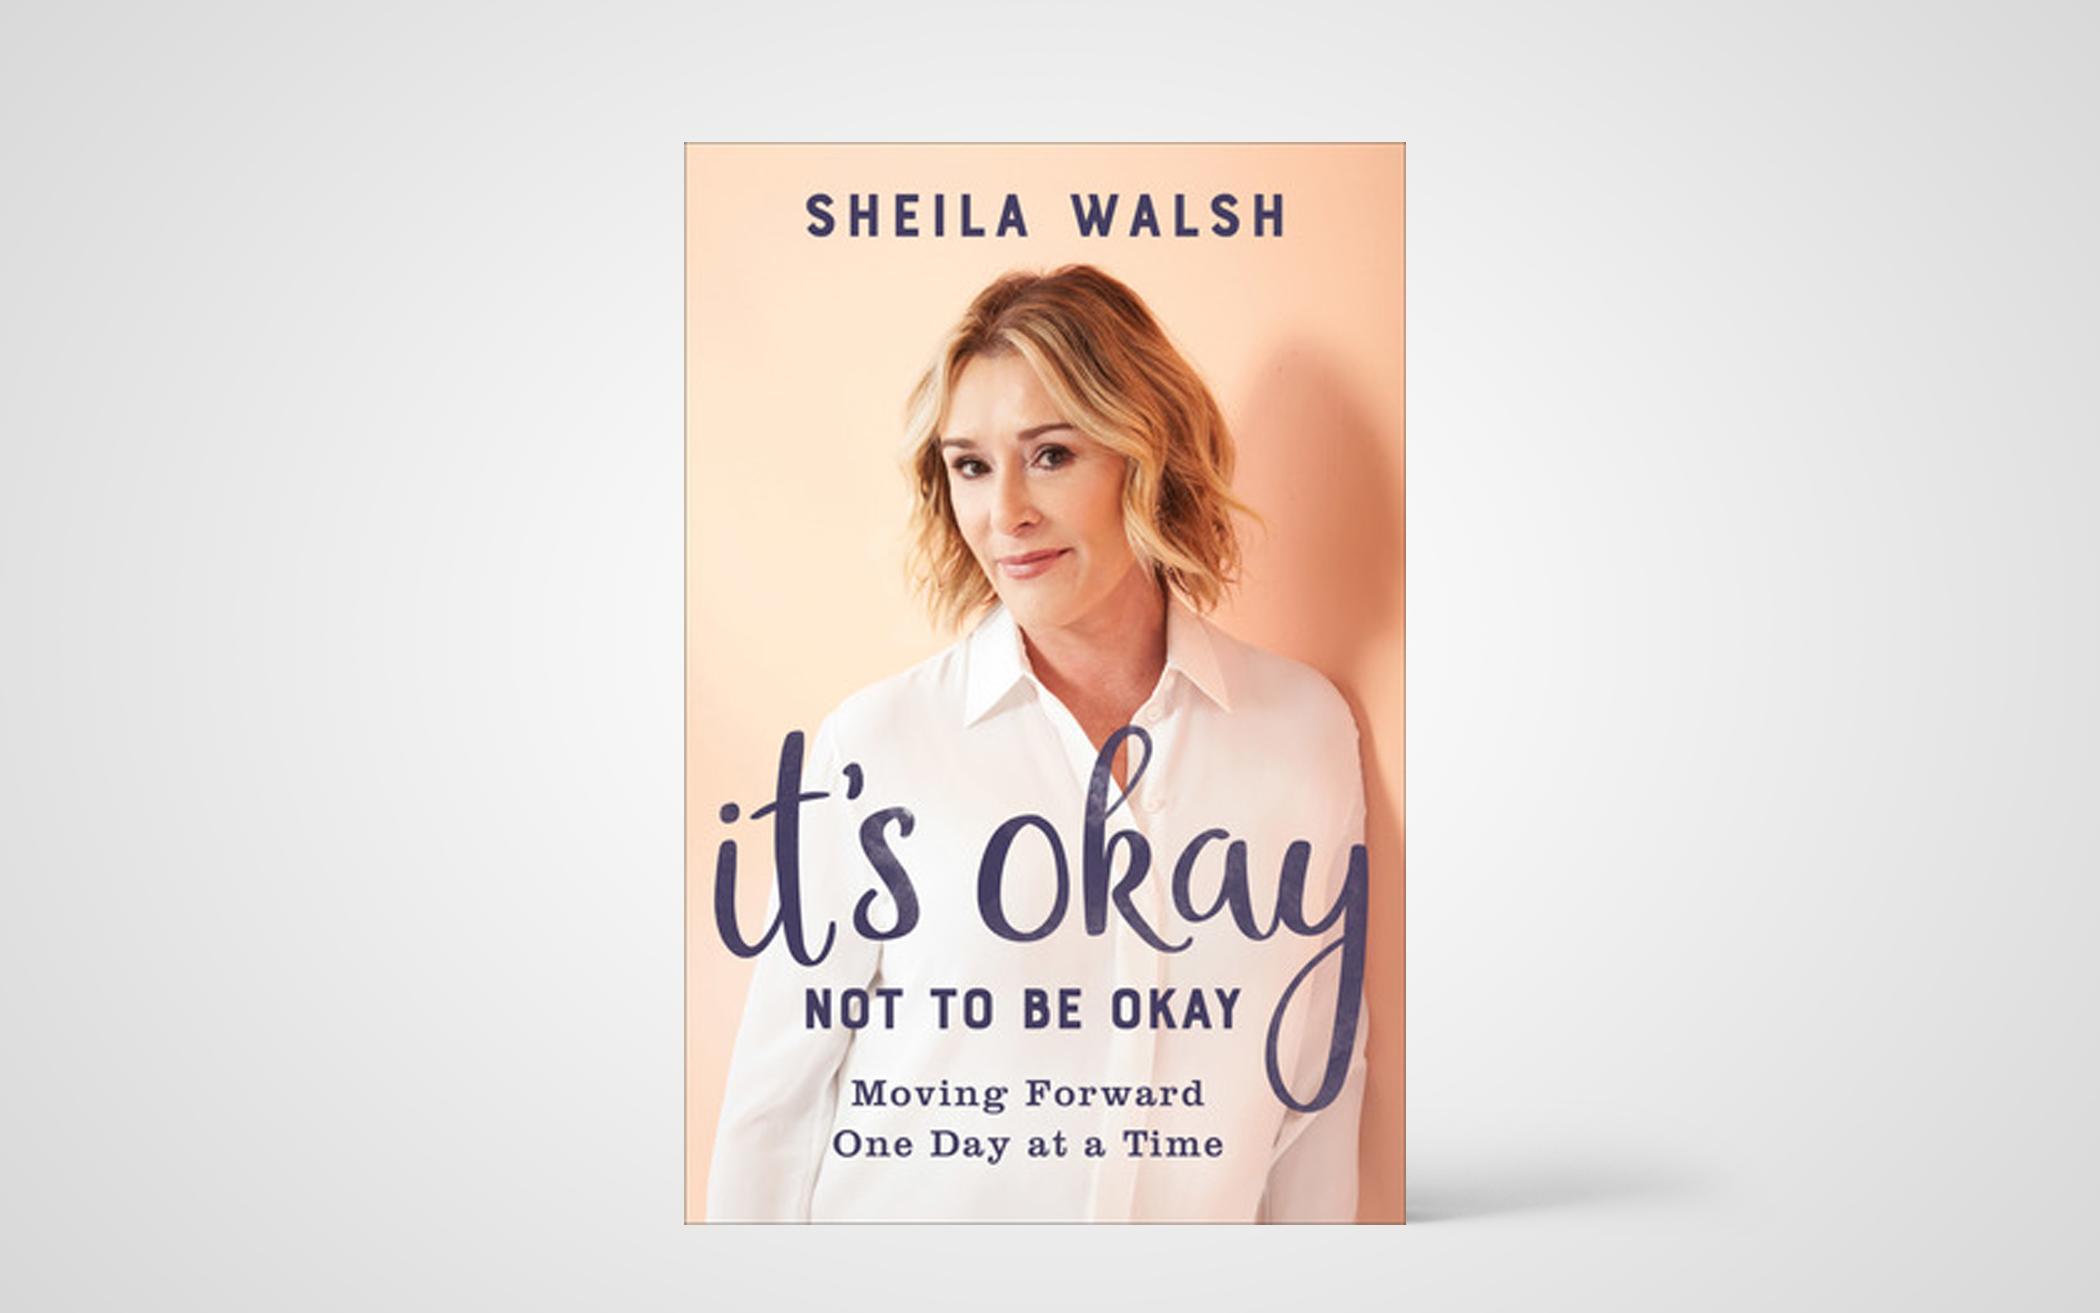 It’s Okay Not to Be Okay: Moving Forward One Day at a Time